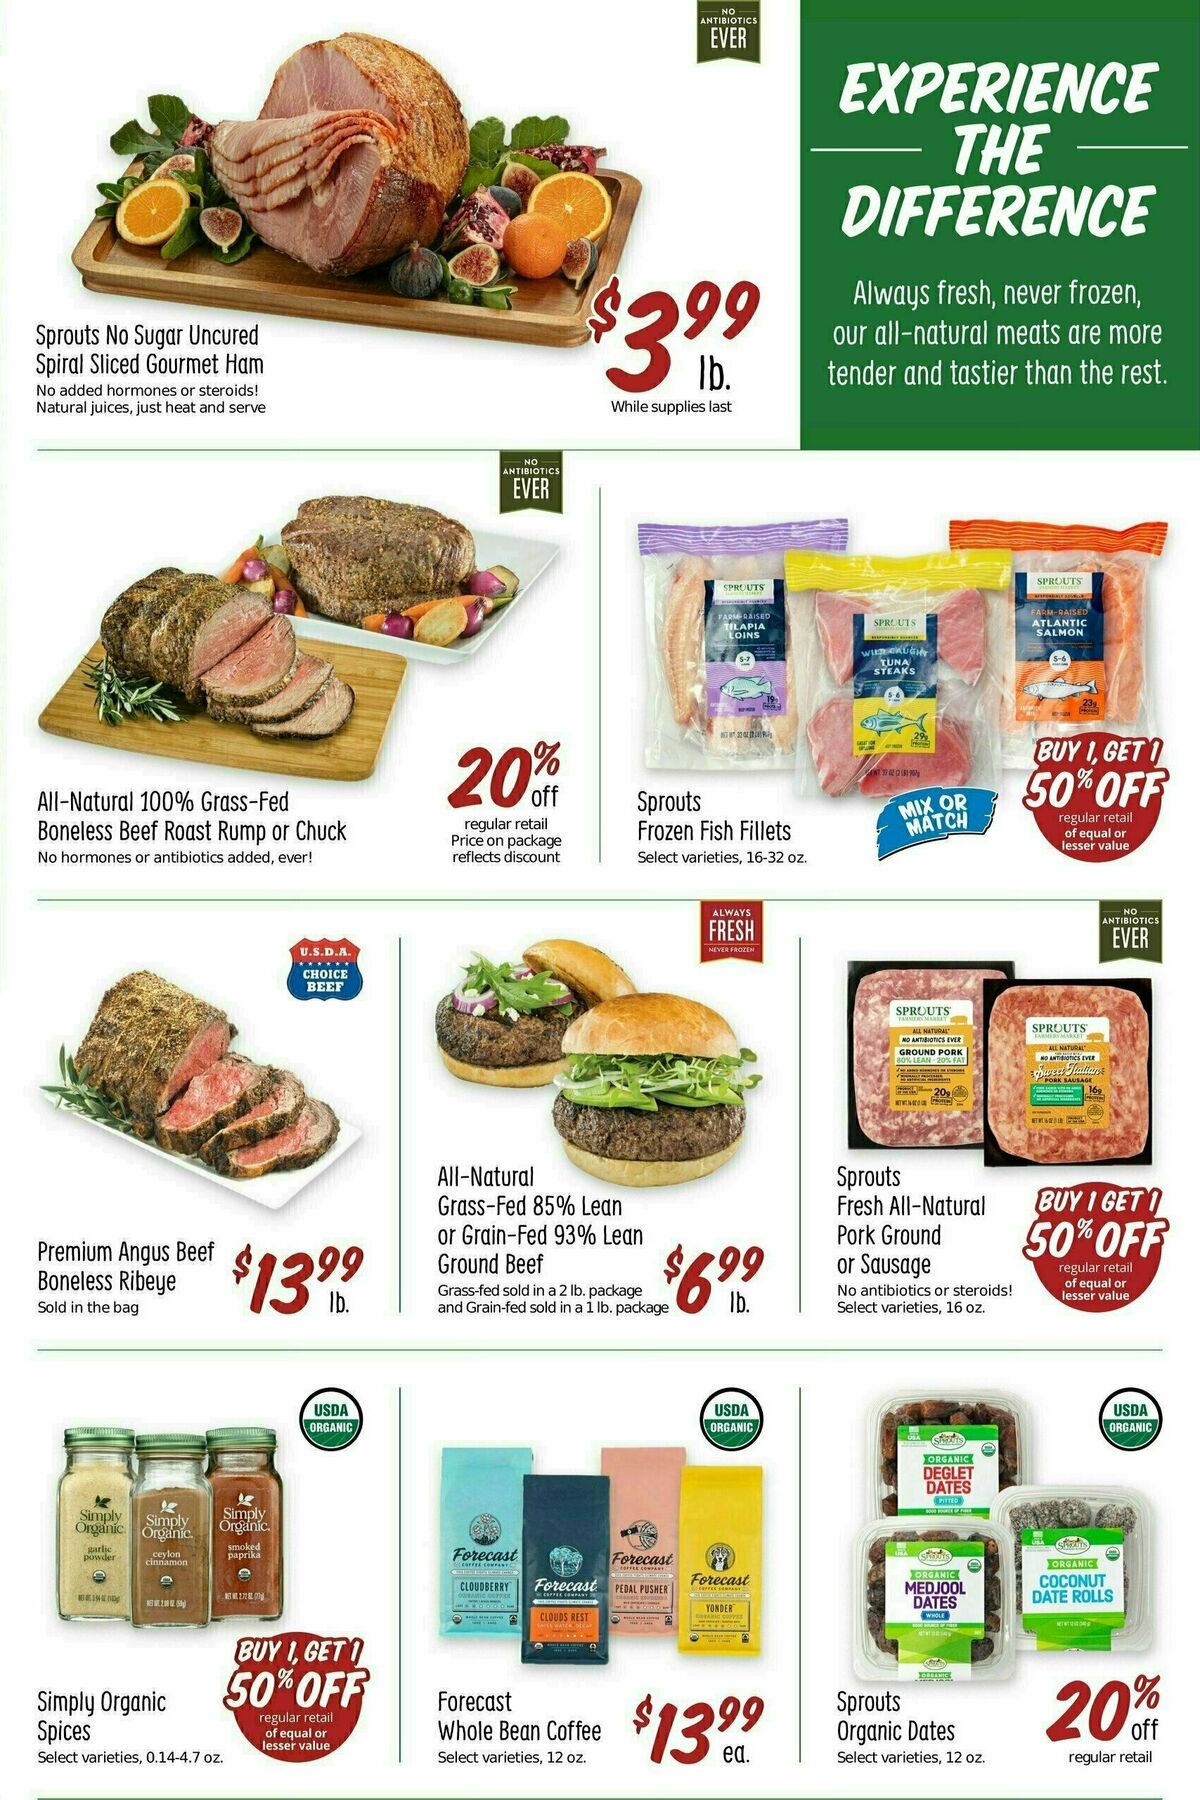 Sprouts Farmers Market Weekly Ad from March 27